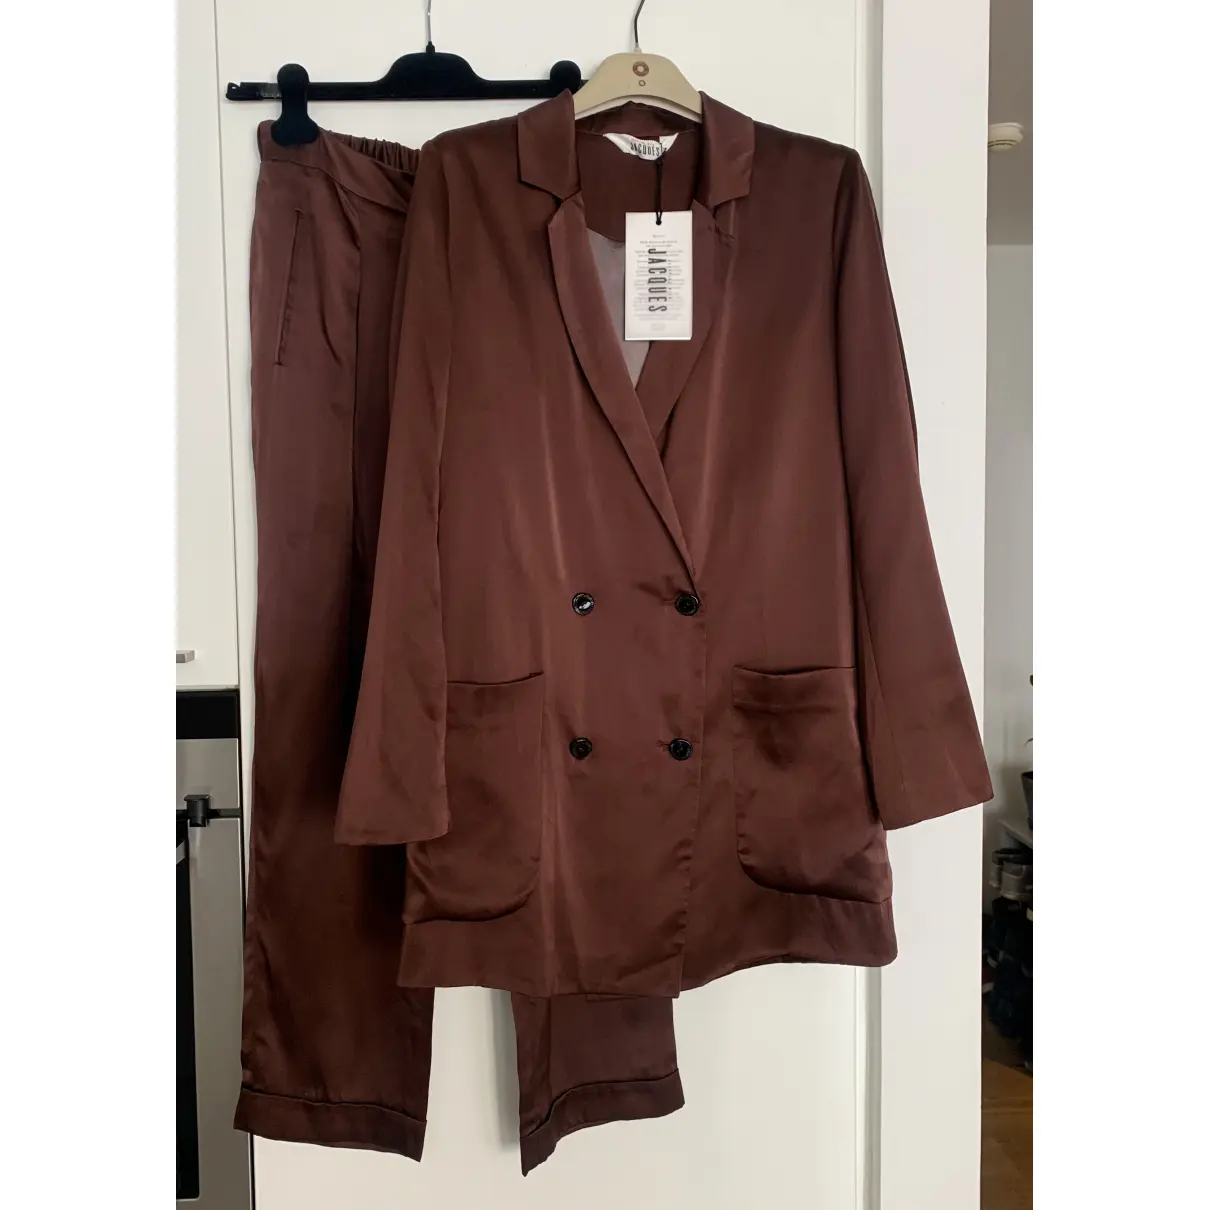 Buy Sleeping with Jacques Silk blazer online